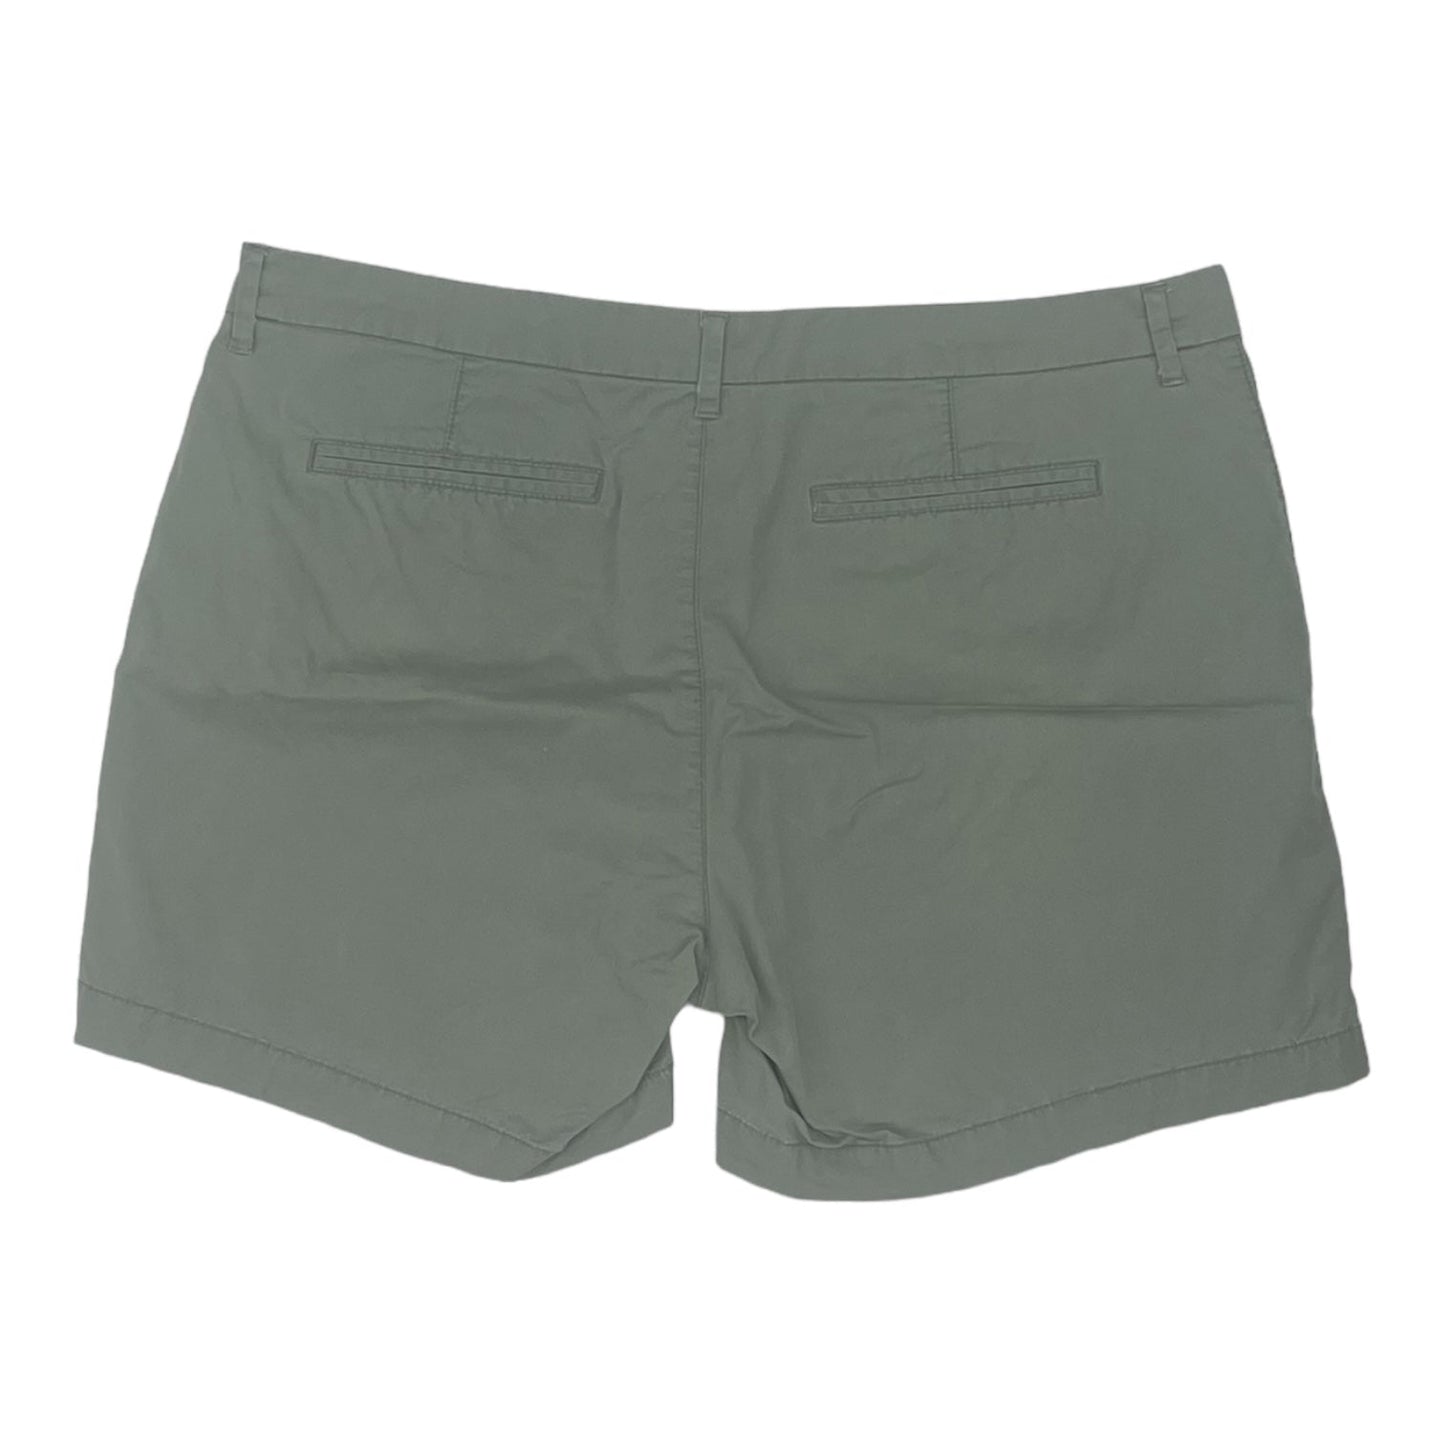 GREEN OLD NAVY SHORTS, Size 14